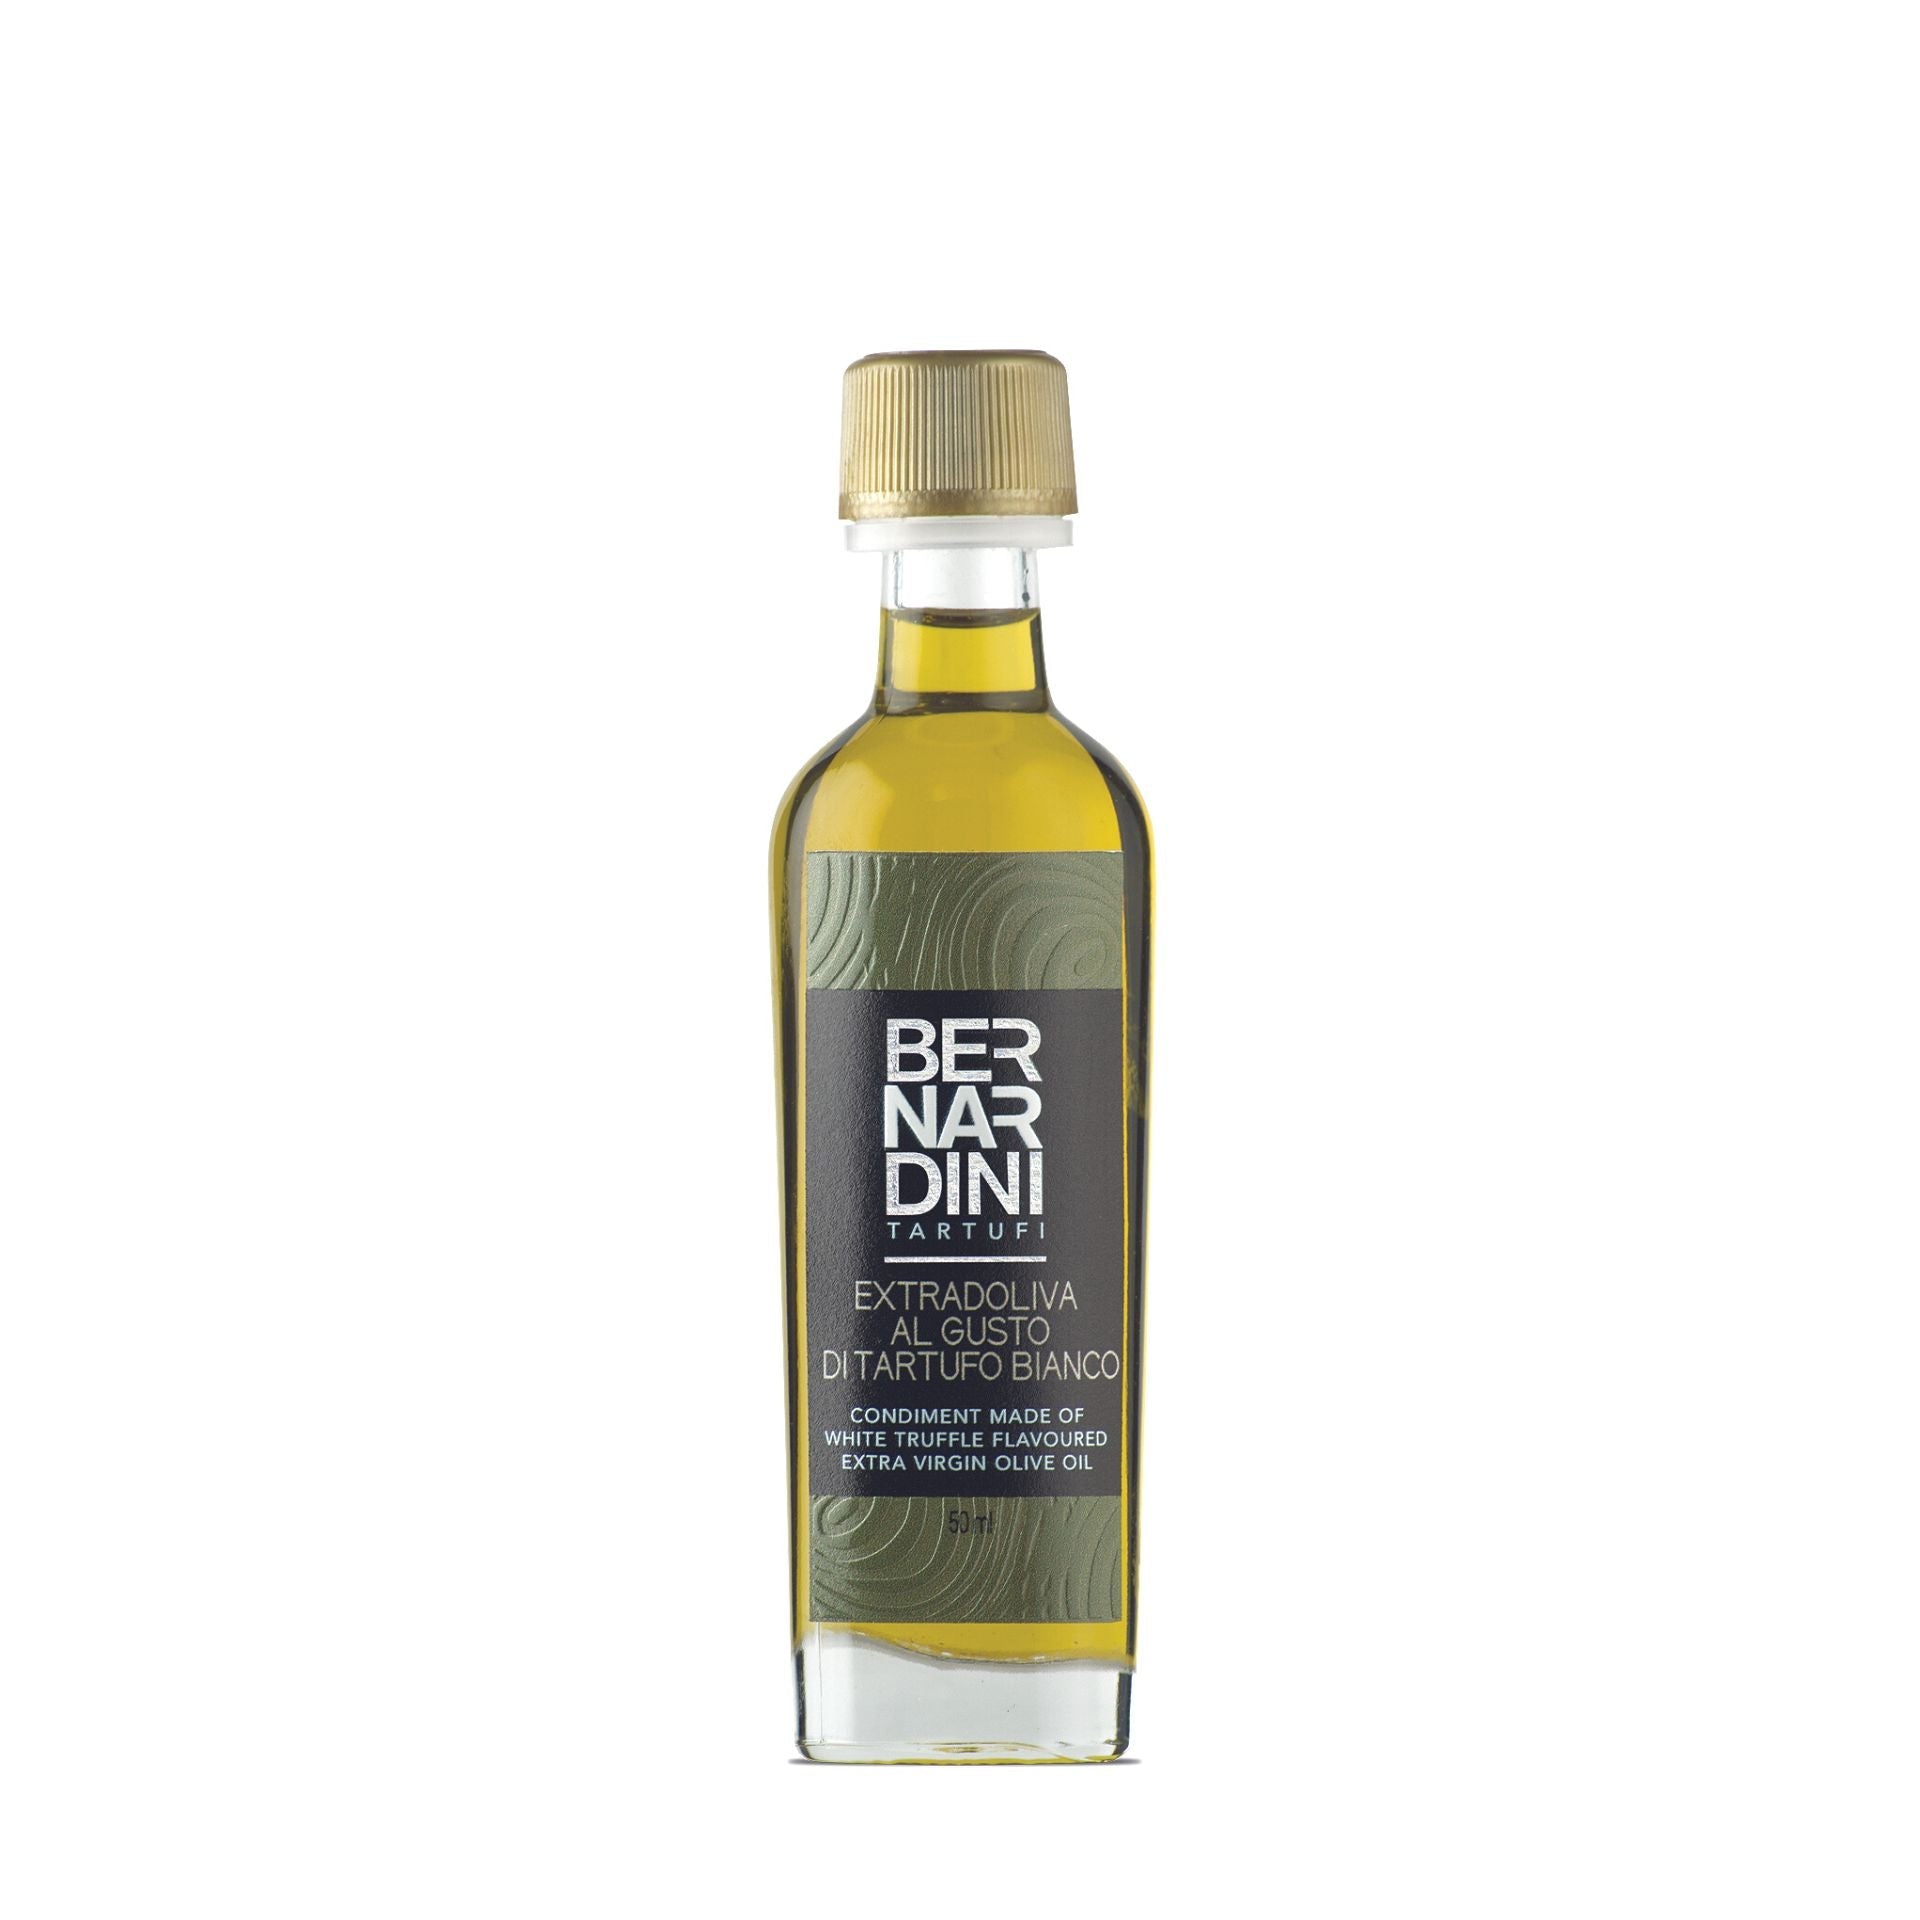 Bernardini Tartufi White Truffle Extra Virgin Olive Oil 50ml  | Imported and distributed in the UK by Just Gourmet Foods